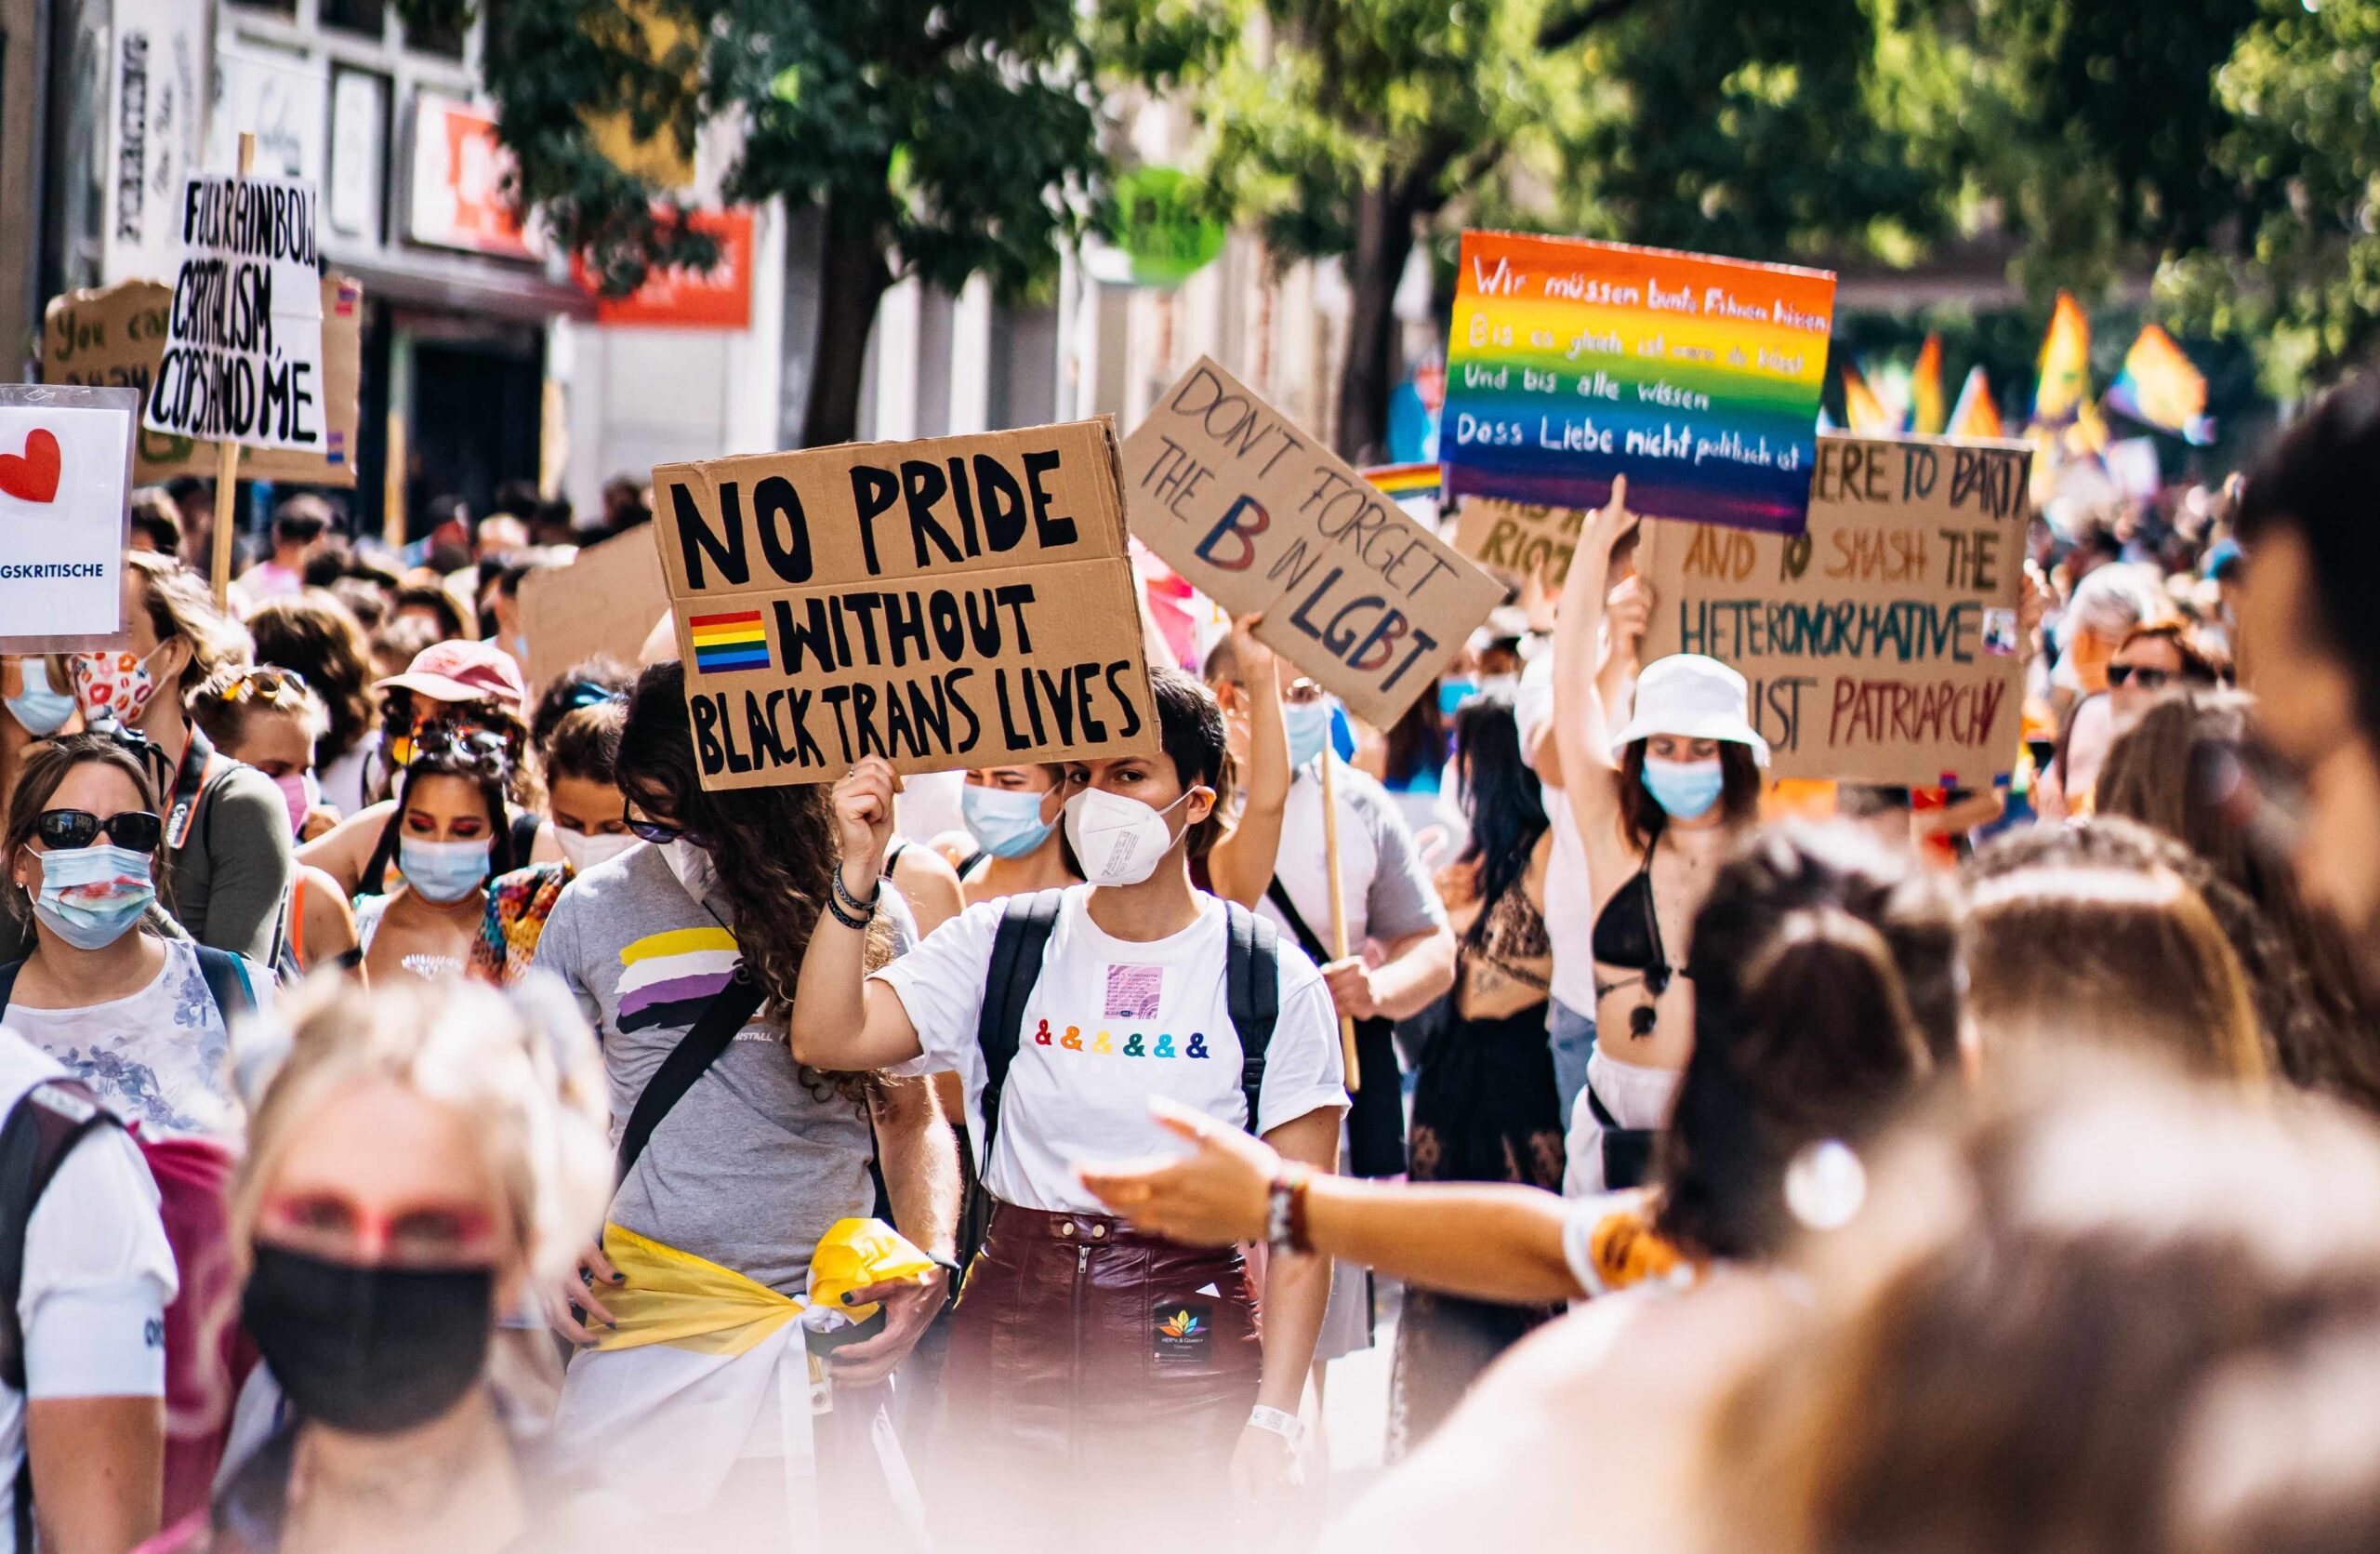 People marching in support of LGBTQ+ rights. (Image: Raphael Renter/Unsplash)